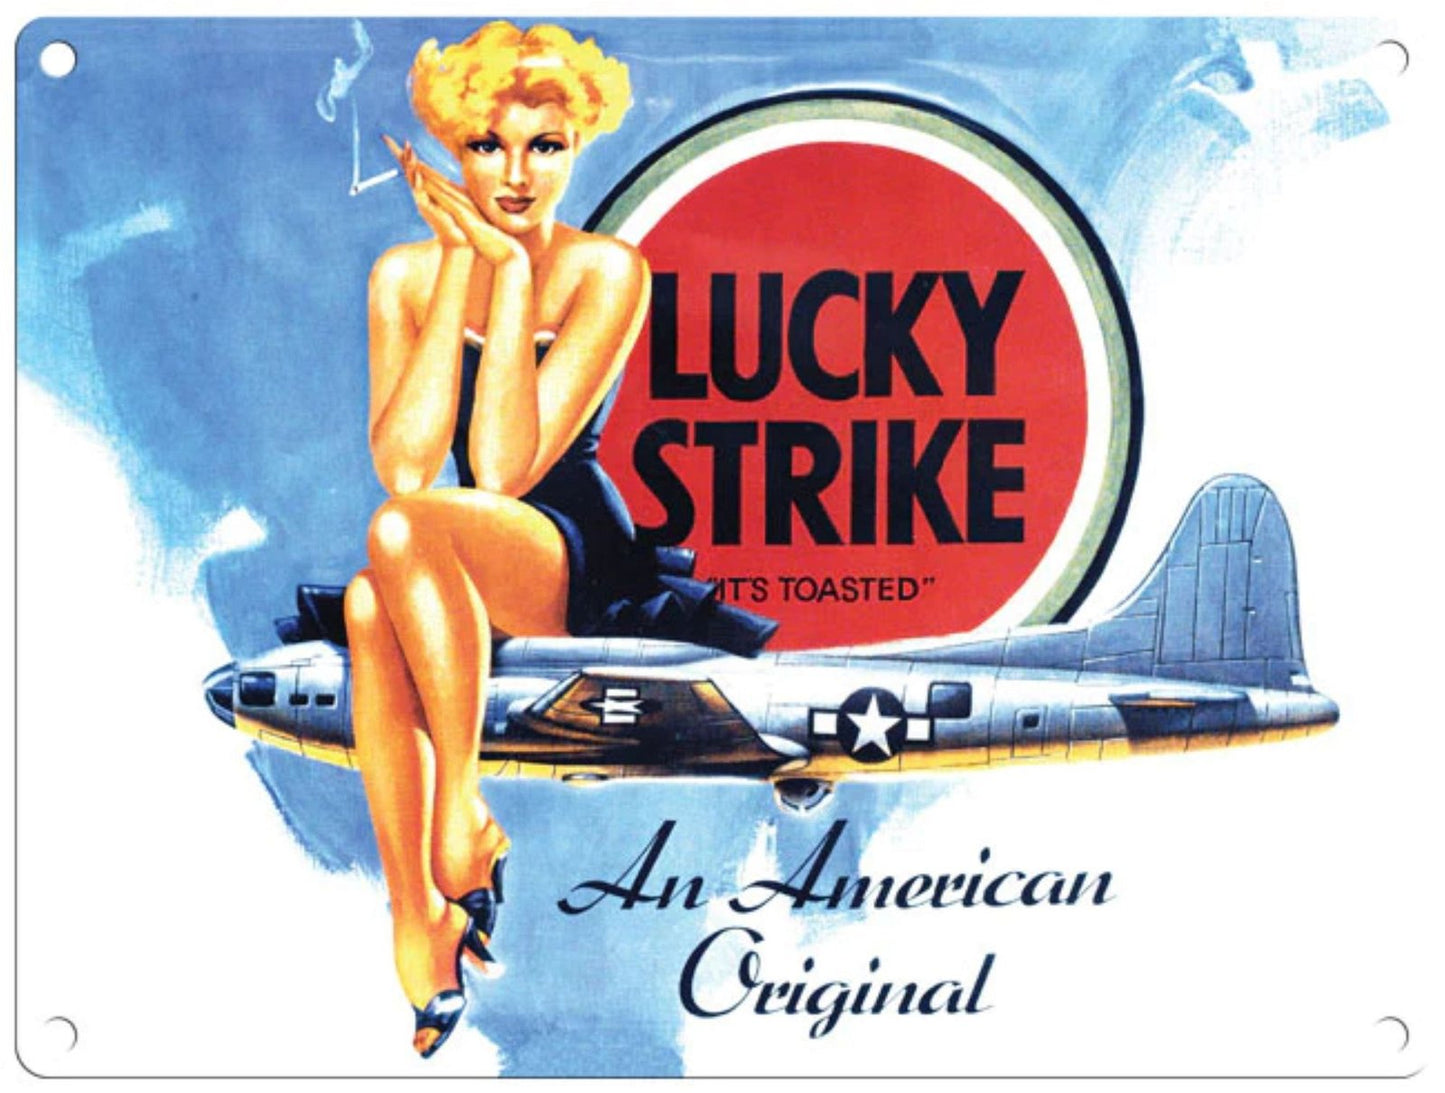 Small Metal Sign 45 x 37.5cm Vintage Retro Lucky Strike Cigarettes Willow and Wine